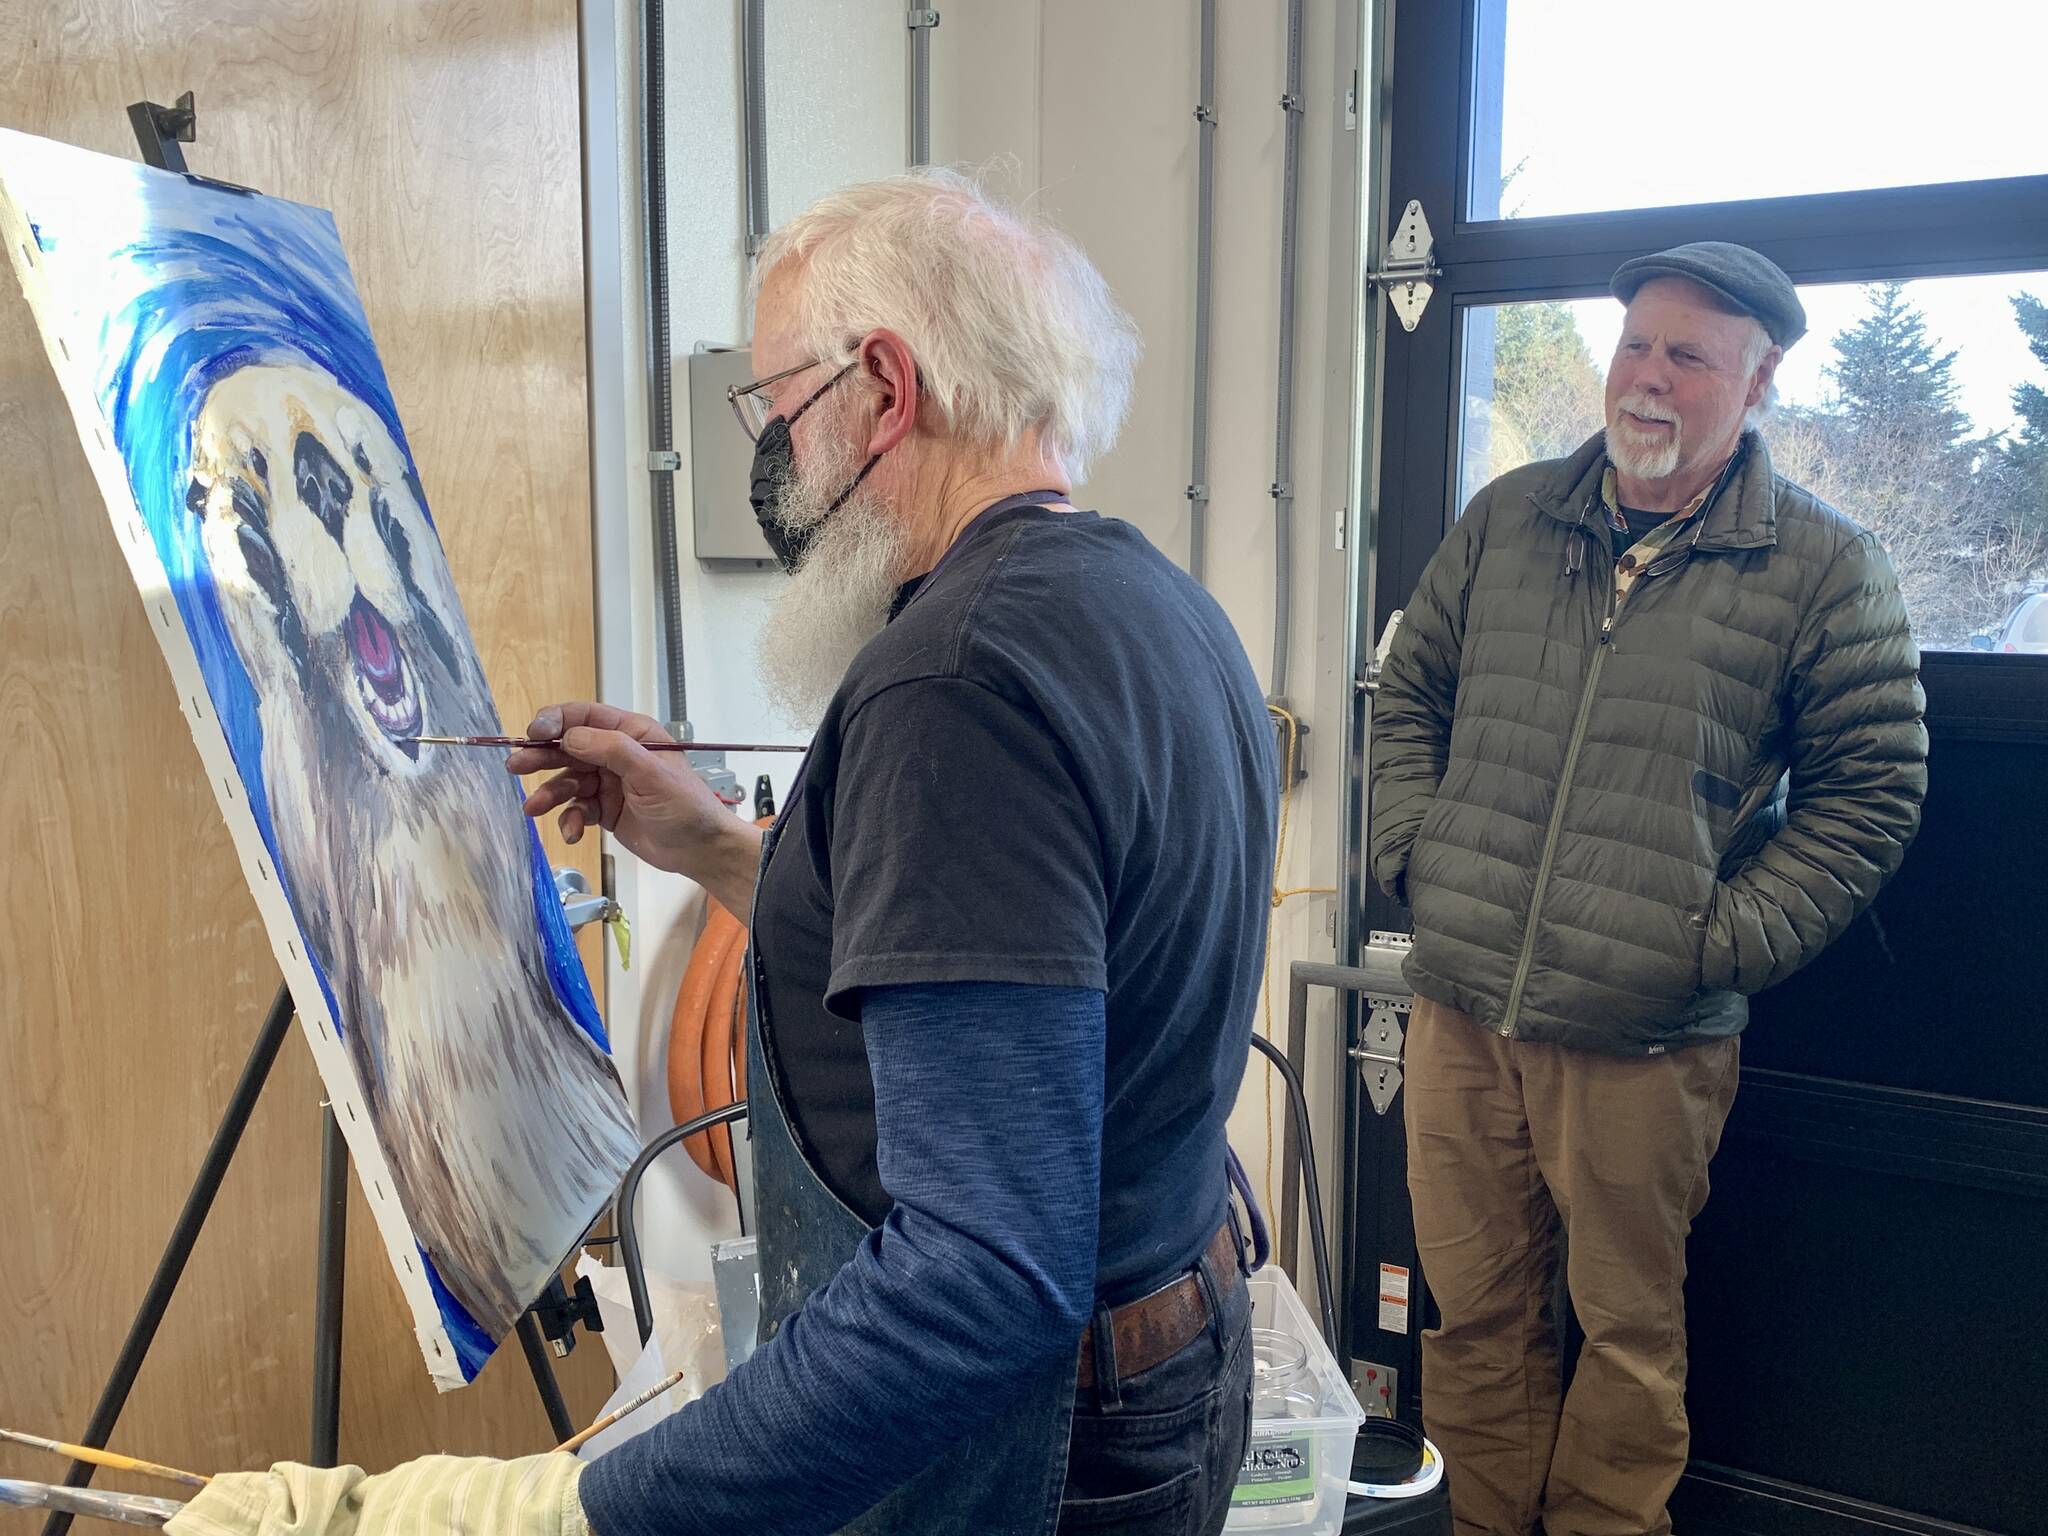 Potter Paul Dungan, right, looks on as Gary Lyons paints during the Ptarmigan Arts scholarship fundraiser at Grace Ridge Brewing on Saturday. (Photo by Christina Whiting/Homer News)